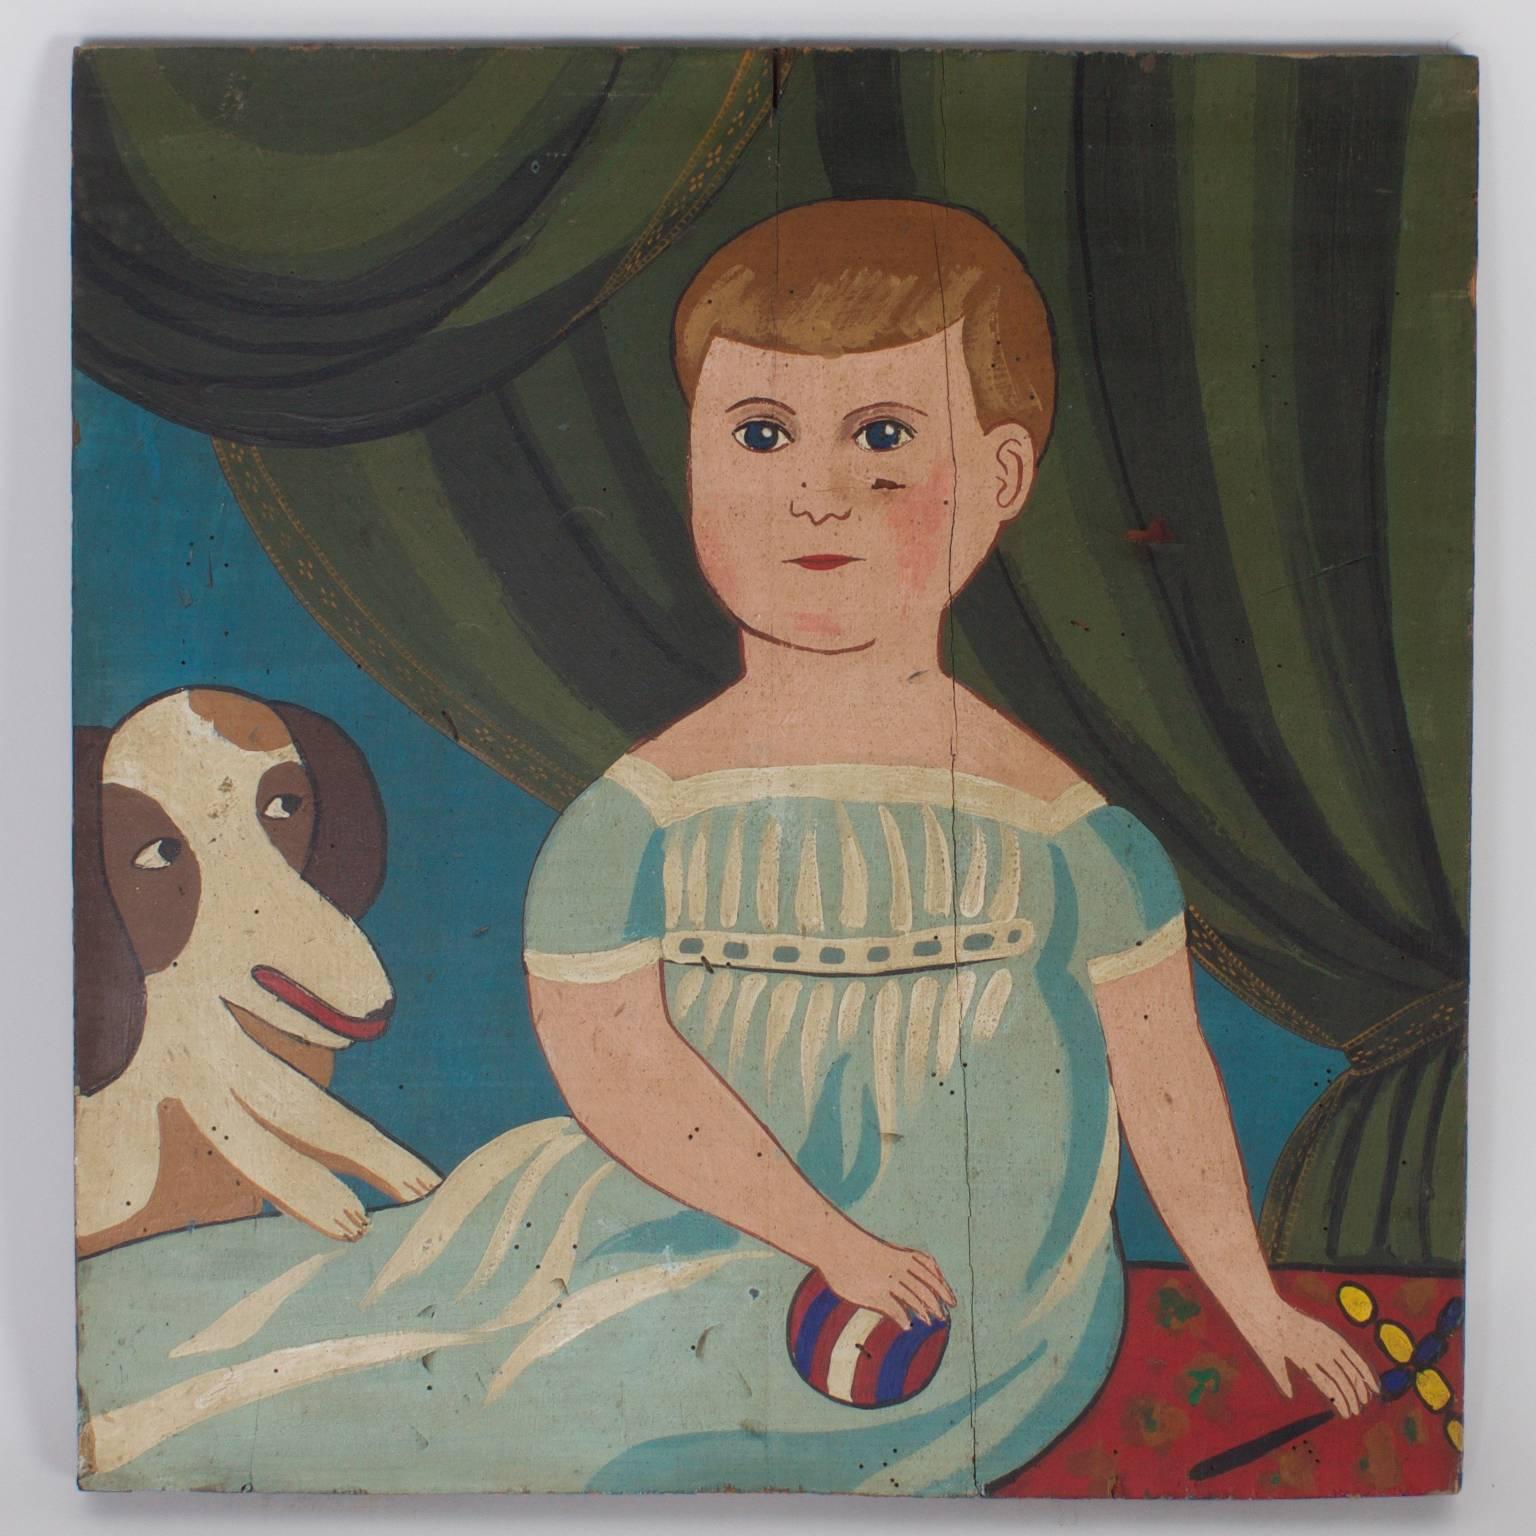 By creating this line of naive, folky primitive paintings on board Karl Mann and associates captured the spirit and charm of this distinctly American style of portraits, and with tongue firmly in cheek brought a pleasing modern twist. $1,850.00 each